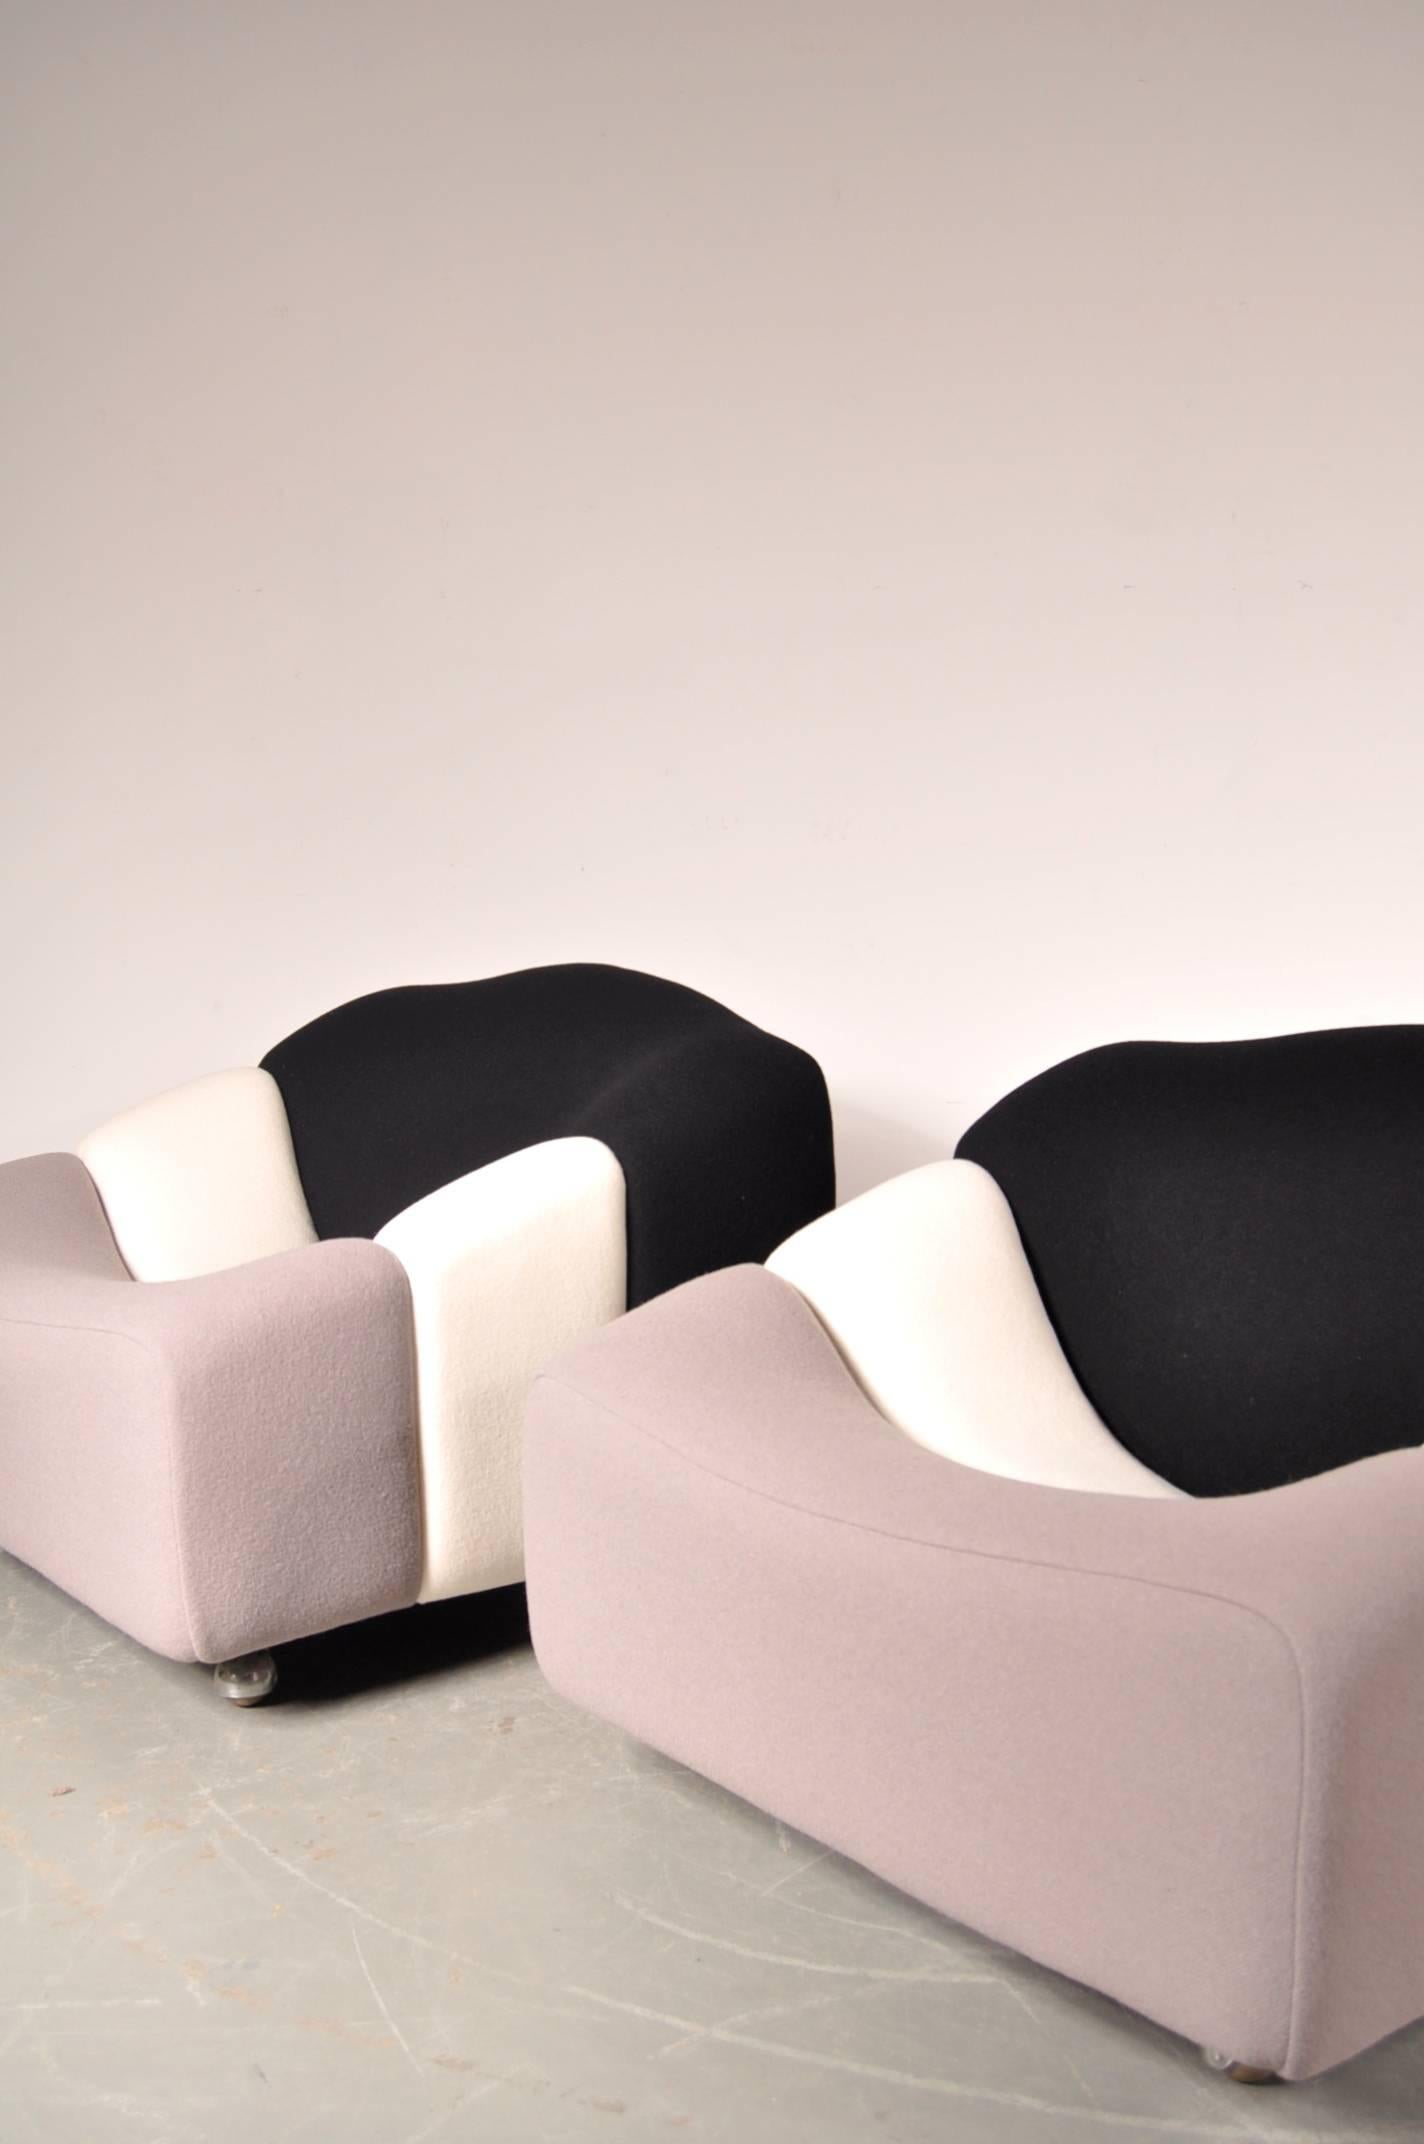 French Pair of ABCD Chairs by Pierre Paulin for Artifort, Netherlands, circa 1960